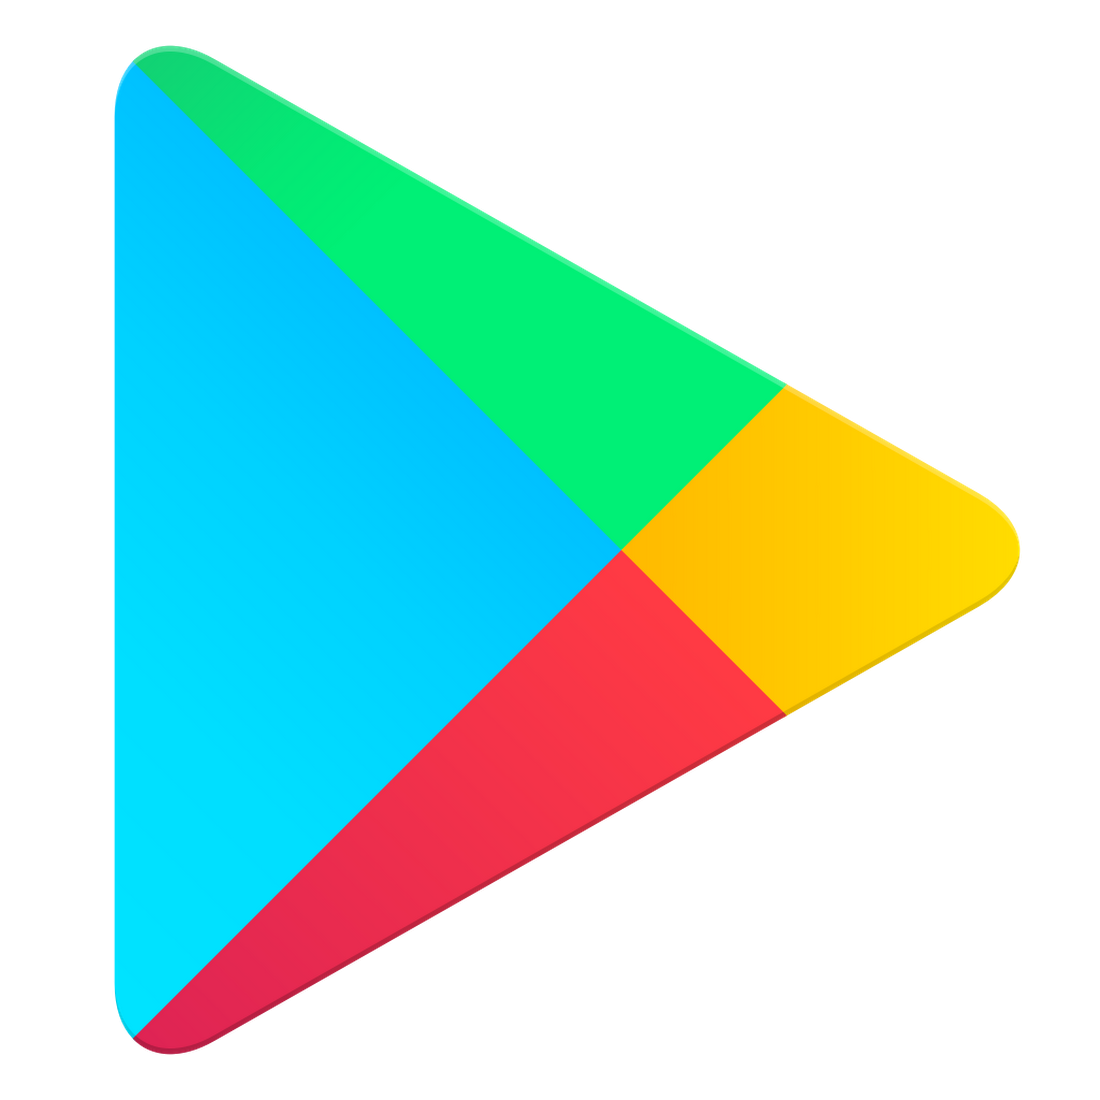 Google Play Store APK & Split APKs Download for Android